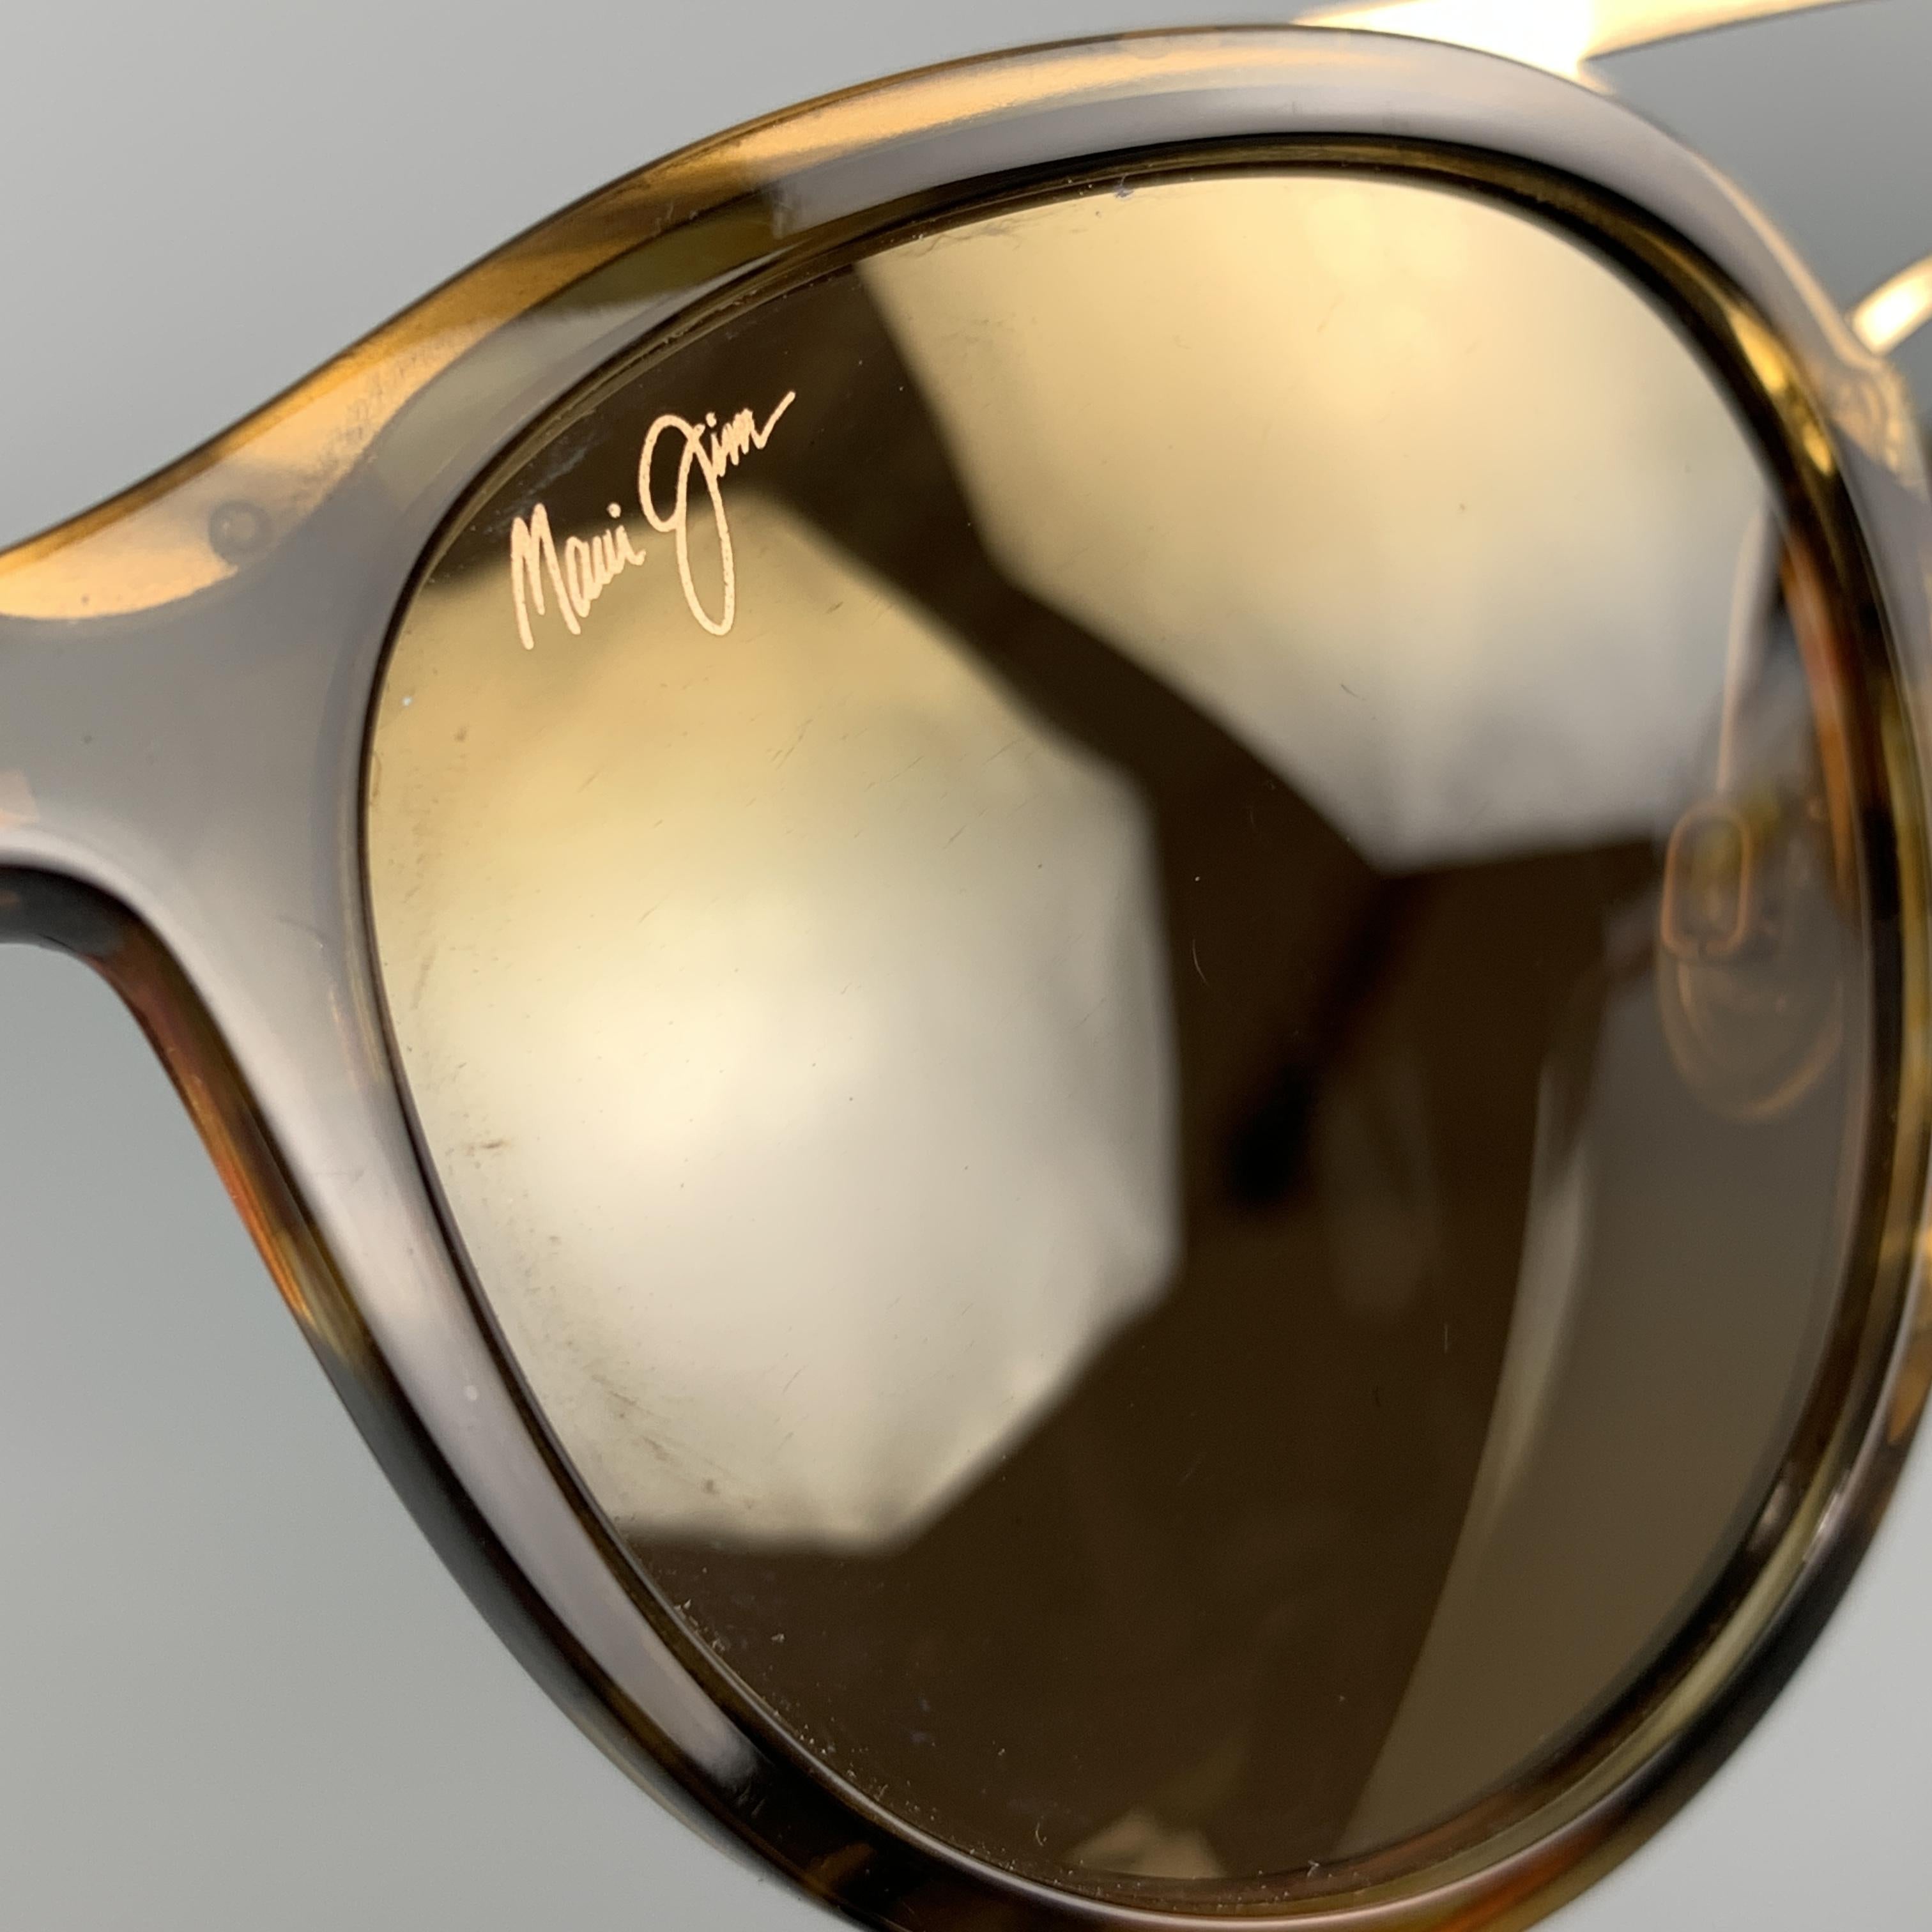 MAUI JIM sunglasses come in tortoiseshell acetate with gold tone metal details and round brown lenses. With case. Made in Italy.

Excellent Pre-Owned Condition.

Measurements:

Length: 13.5 cm.
Height: 5 cm.